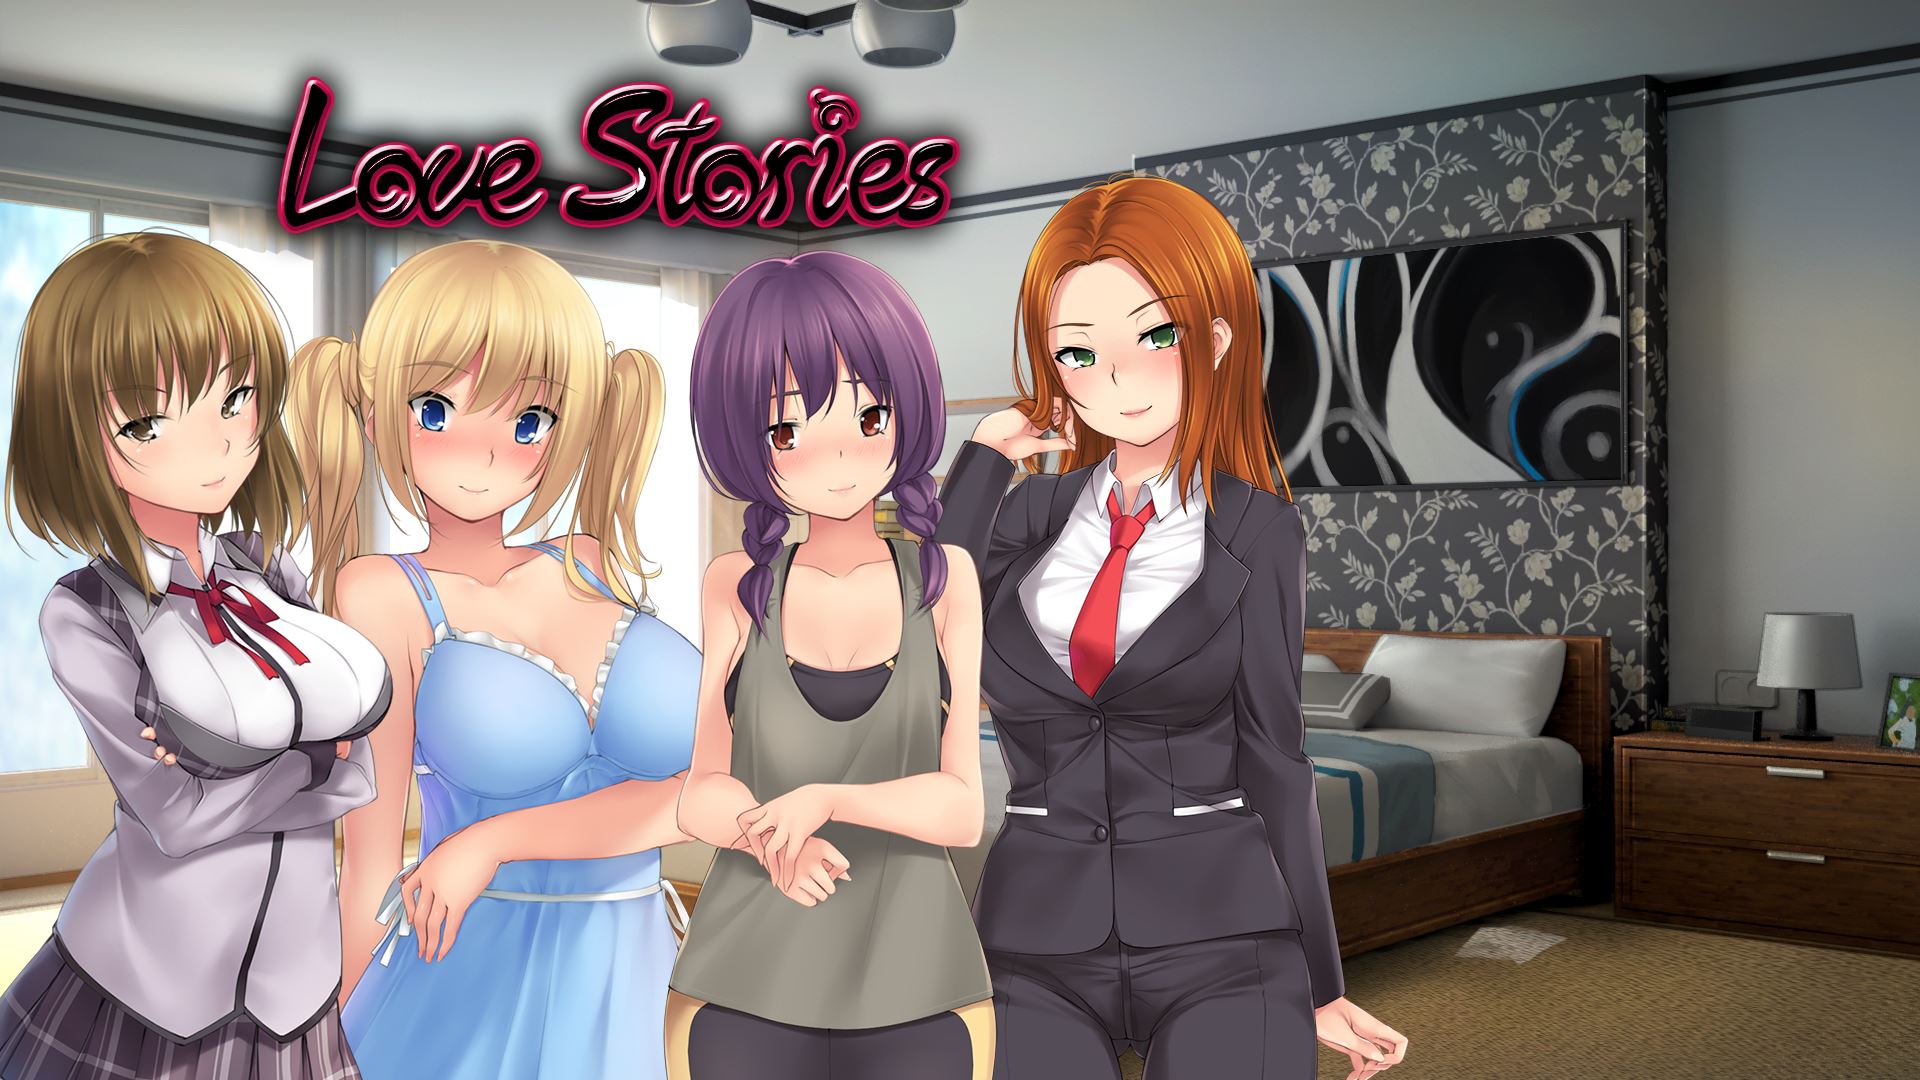 1920px x 1080px - Negligee: Love Stories Ren'Py Porn Sex Game v.Final Download for Windows